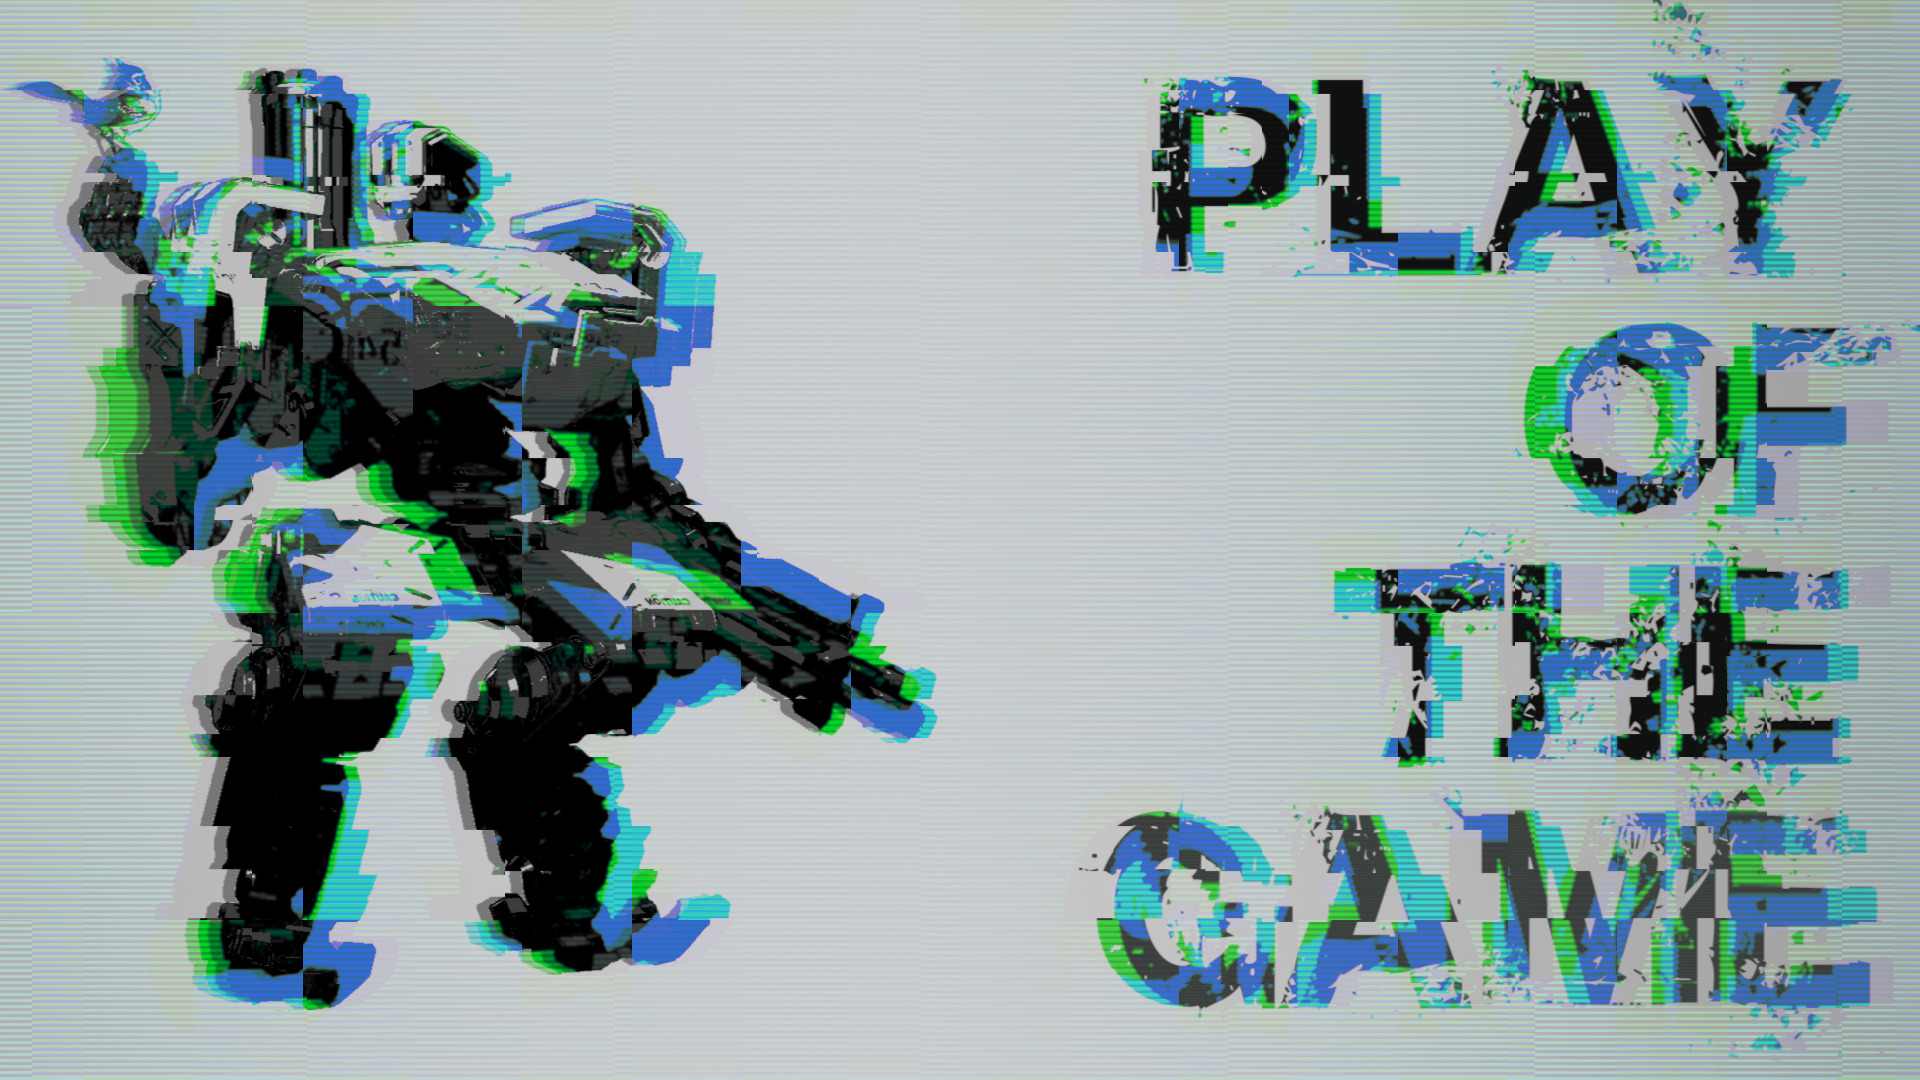 Bastion Overwatch Video Games Overwatch Glitch Art Wallpapers Hd Desktop And Mobile Backgrounds